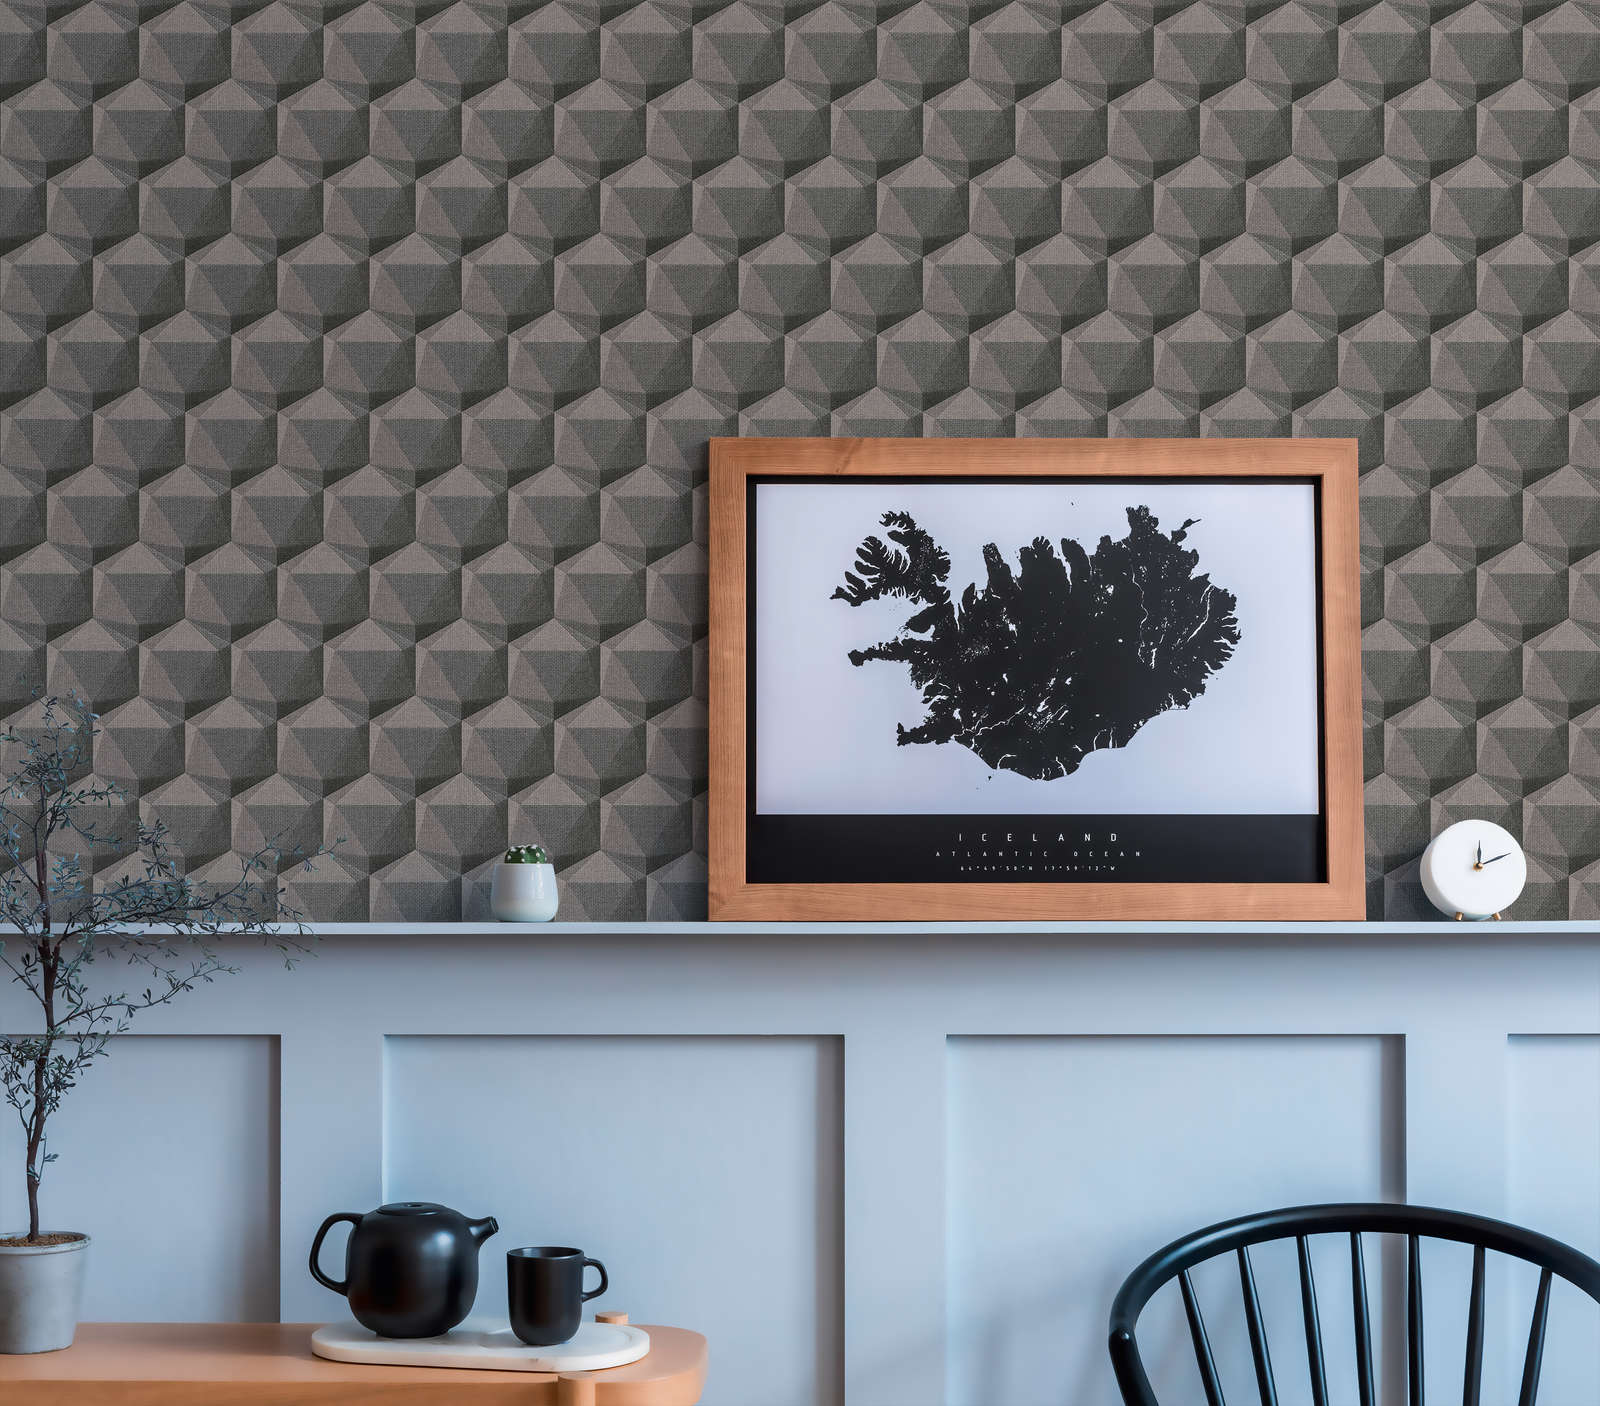             Graphic wallpaper 3D look with polygon pattern - grey, beige, black
        